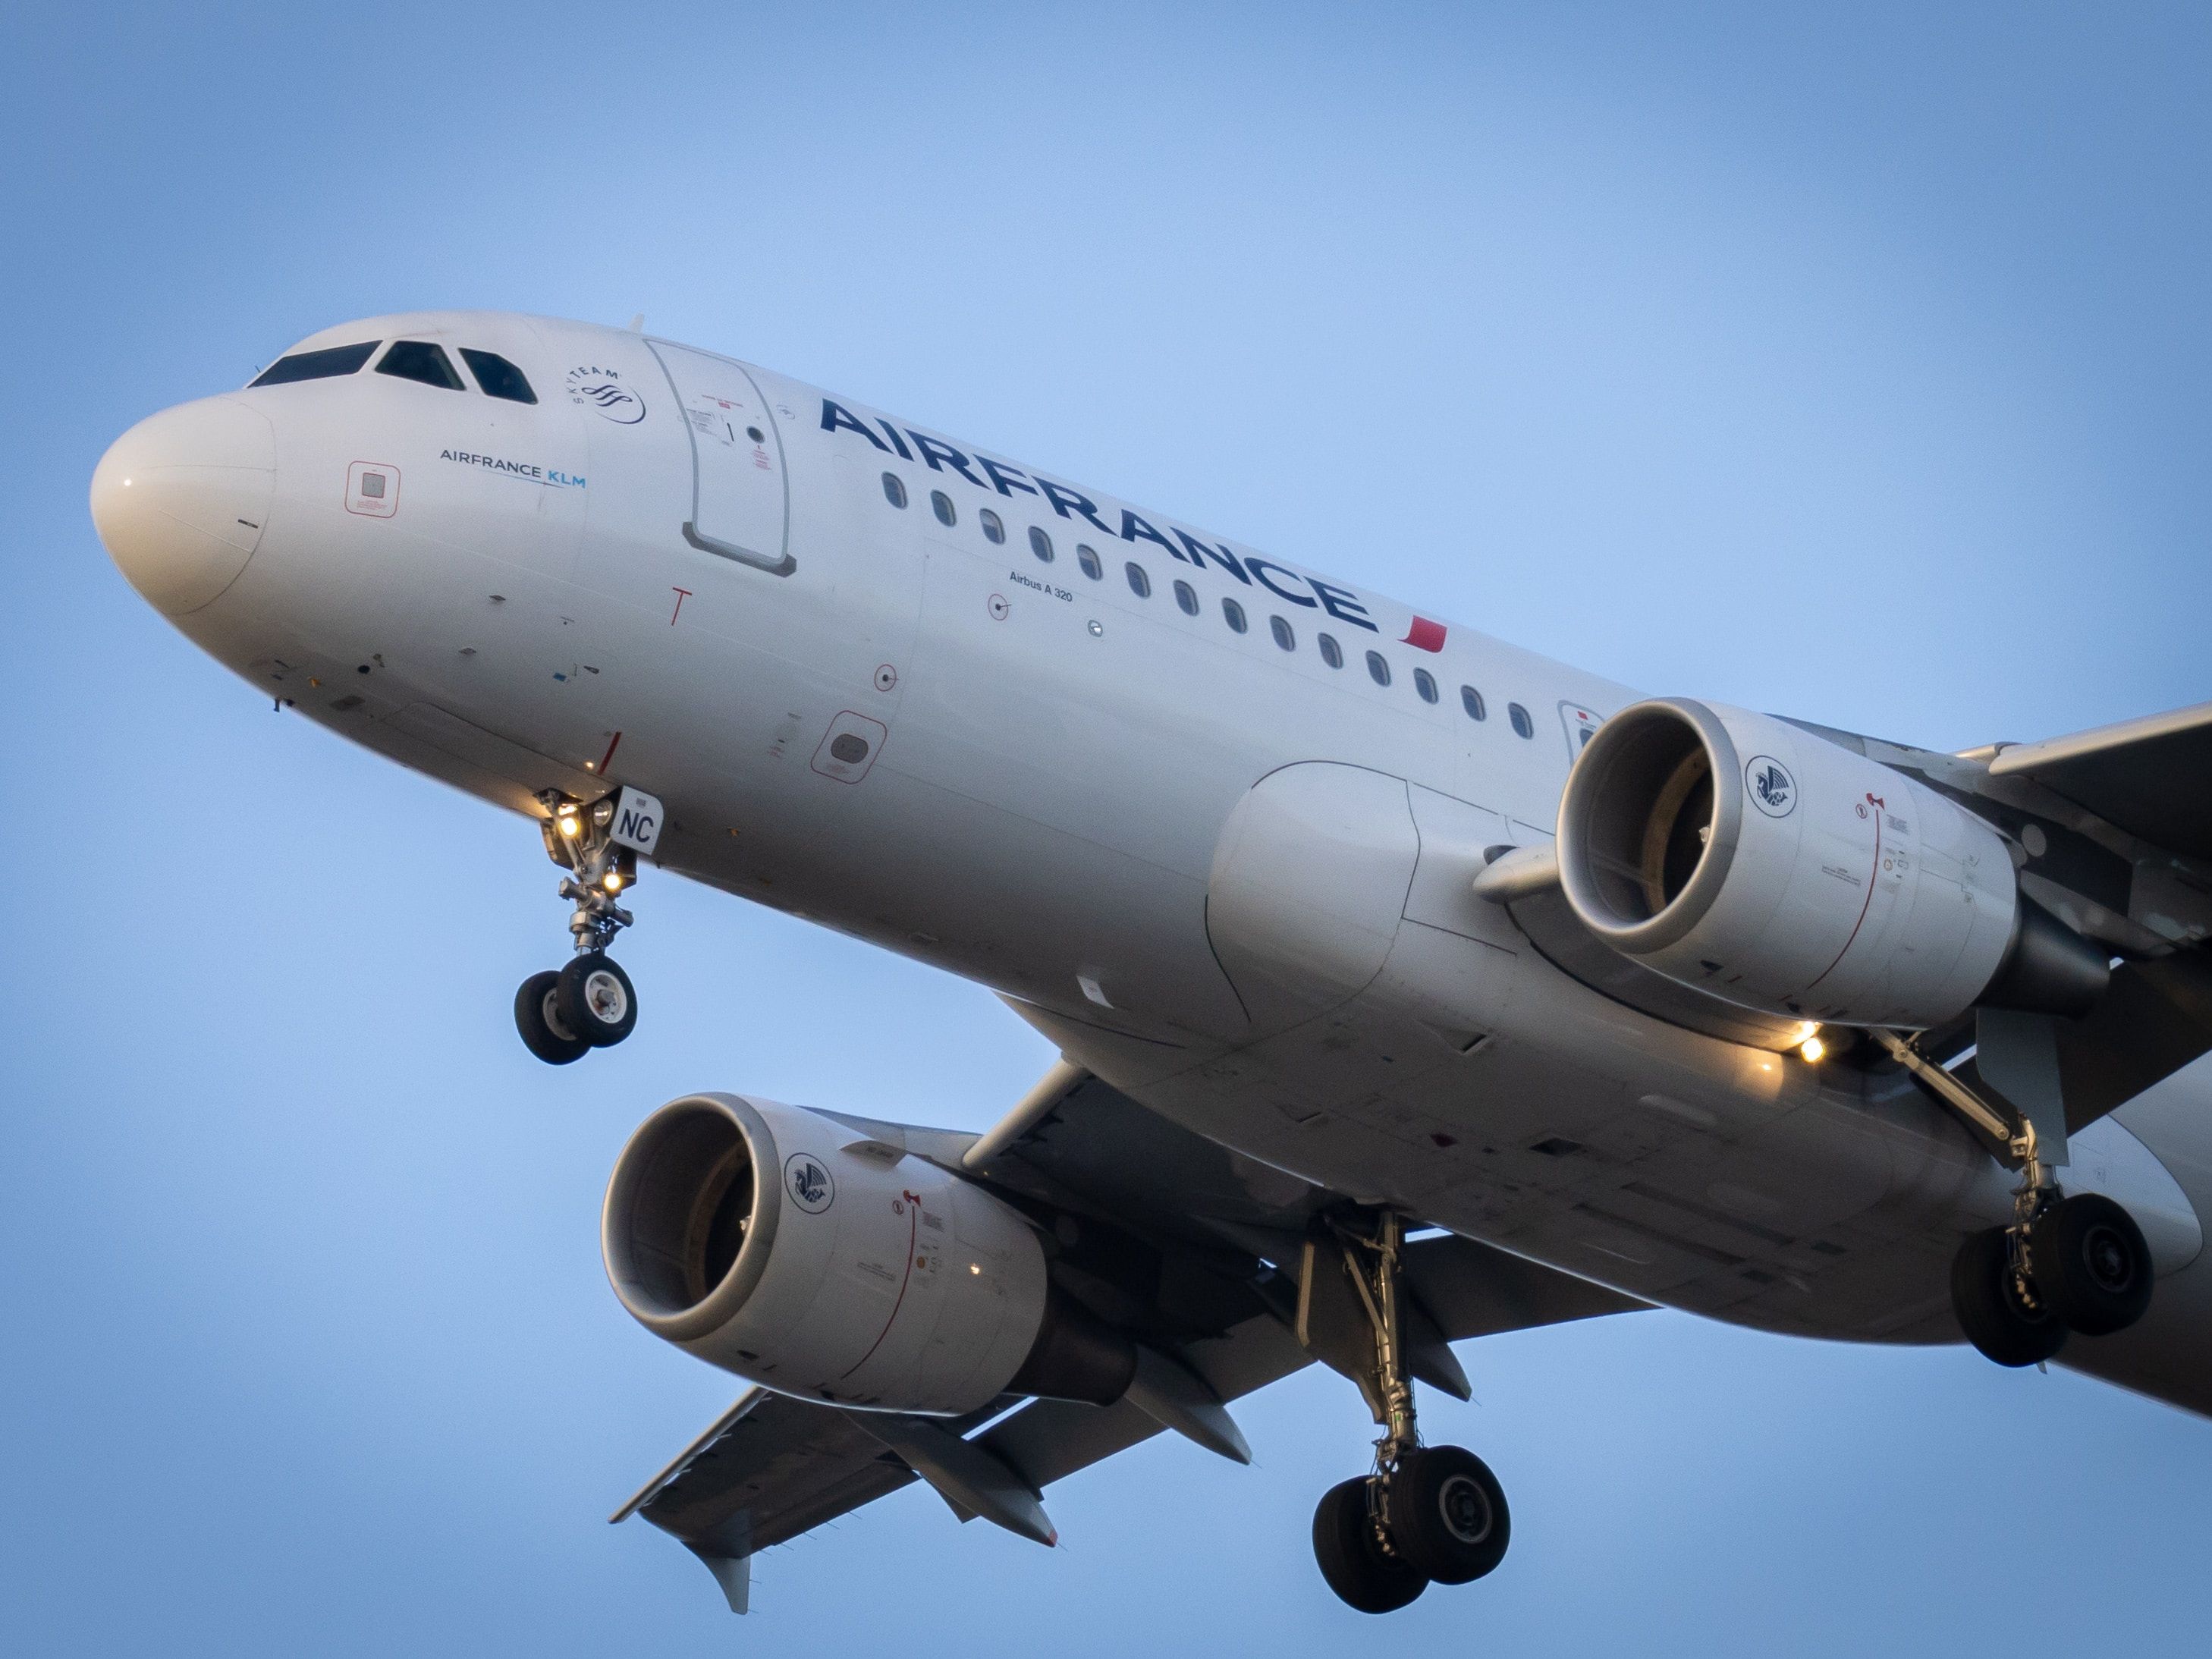 Air France Picture. Download Free Image